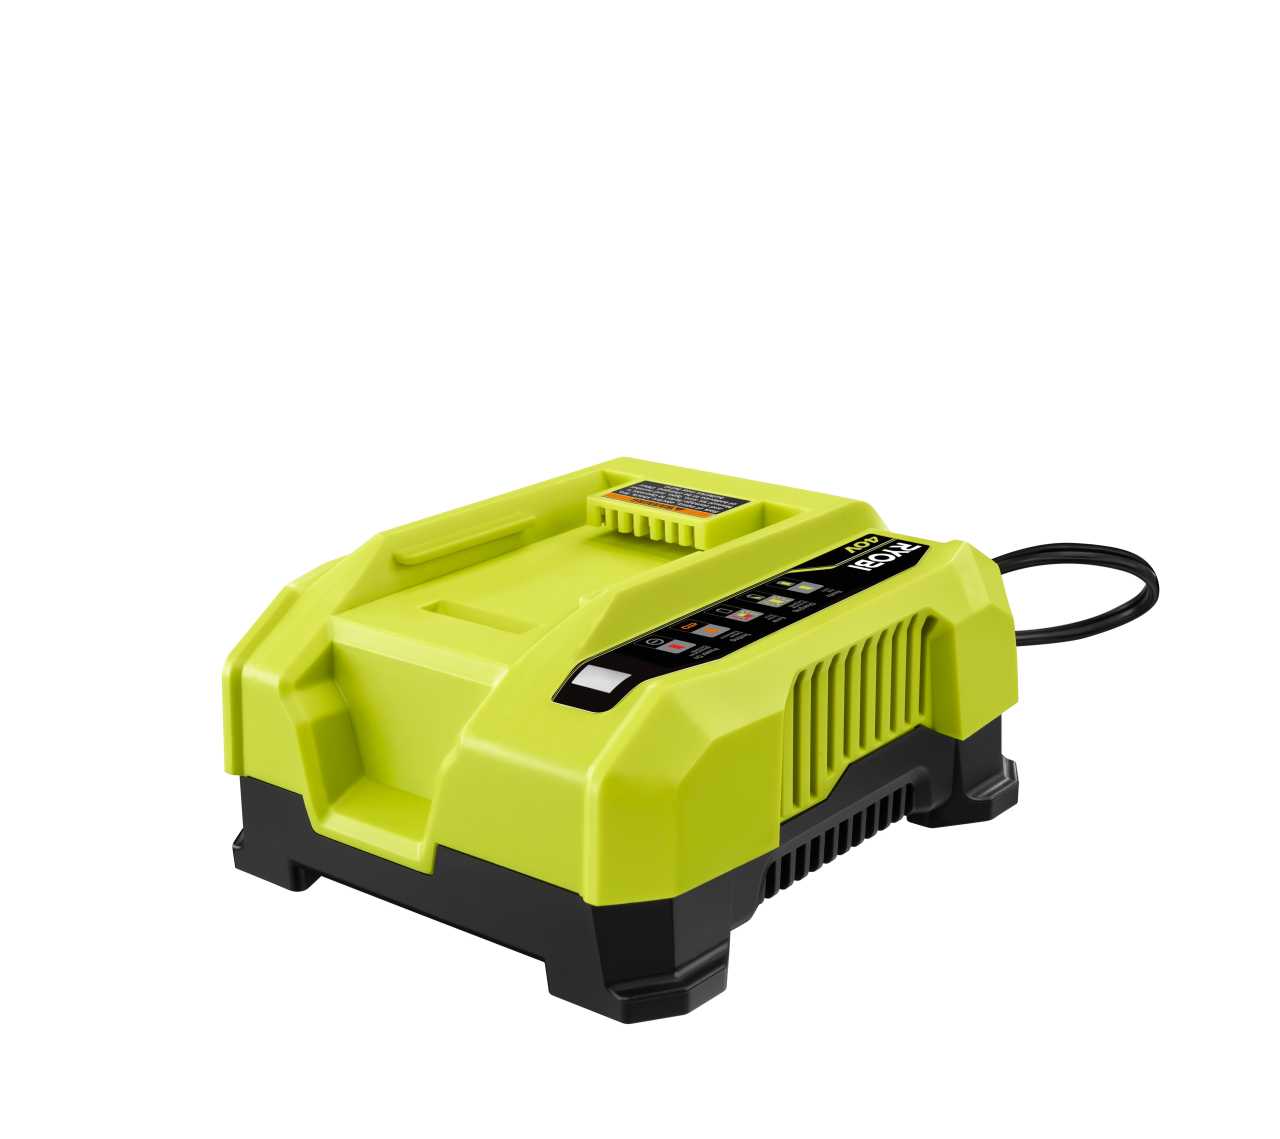 Product Features Image for 40V LITHIUM-ION 6.0AH HIGH CAPACITY BATTERY AND RAPID CHARGER KIT.